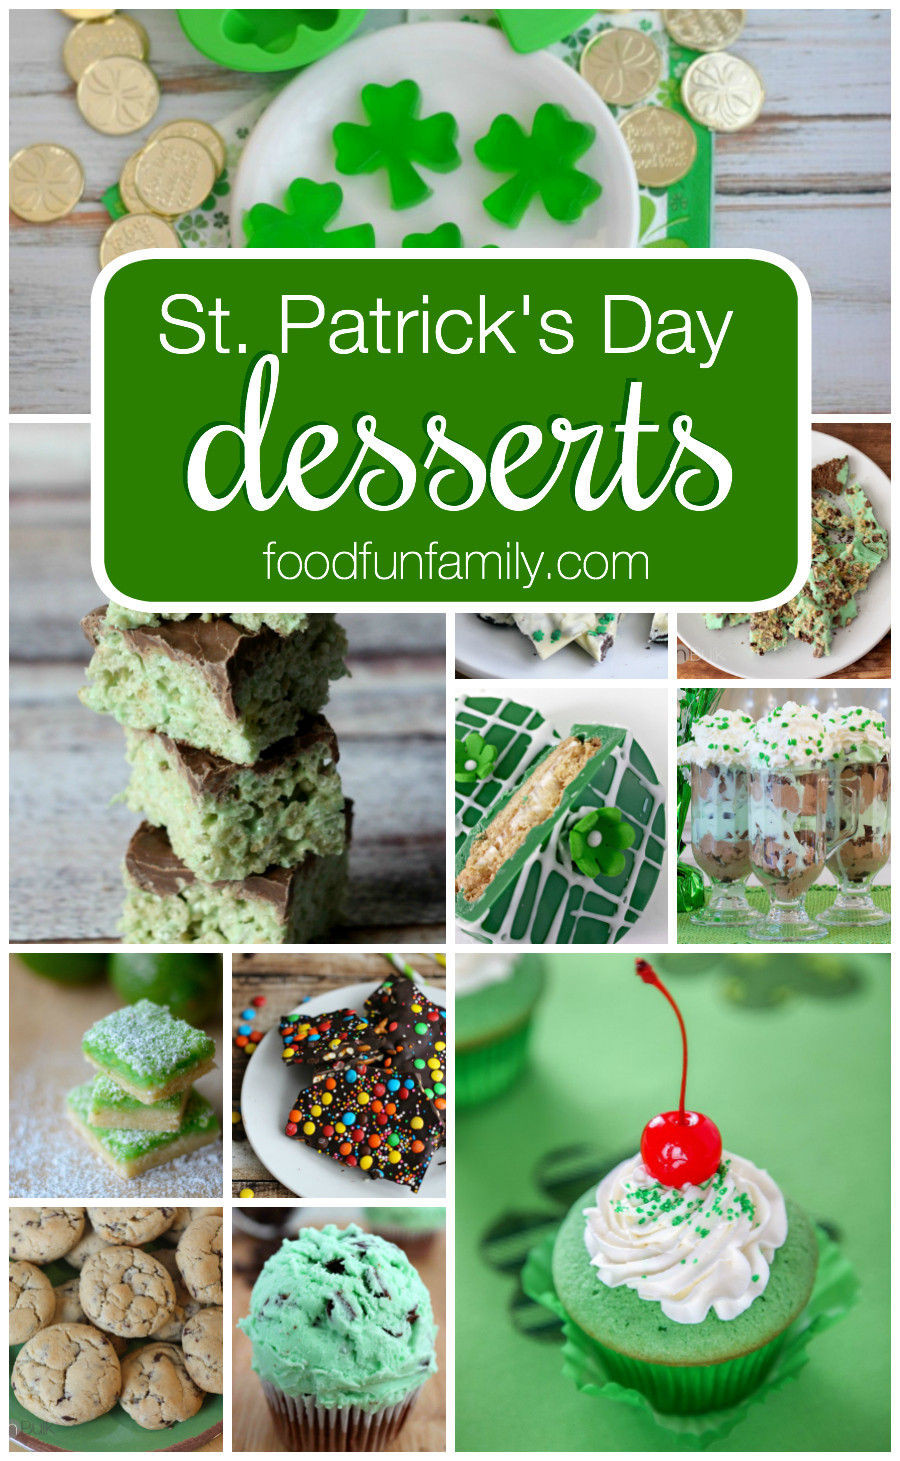 Saint Patrick's Day Food
 17 Delicious St Patrick’s Day Desserts